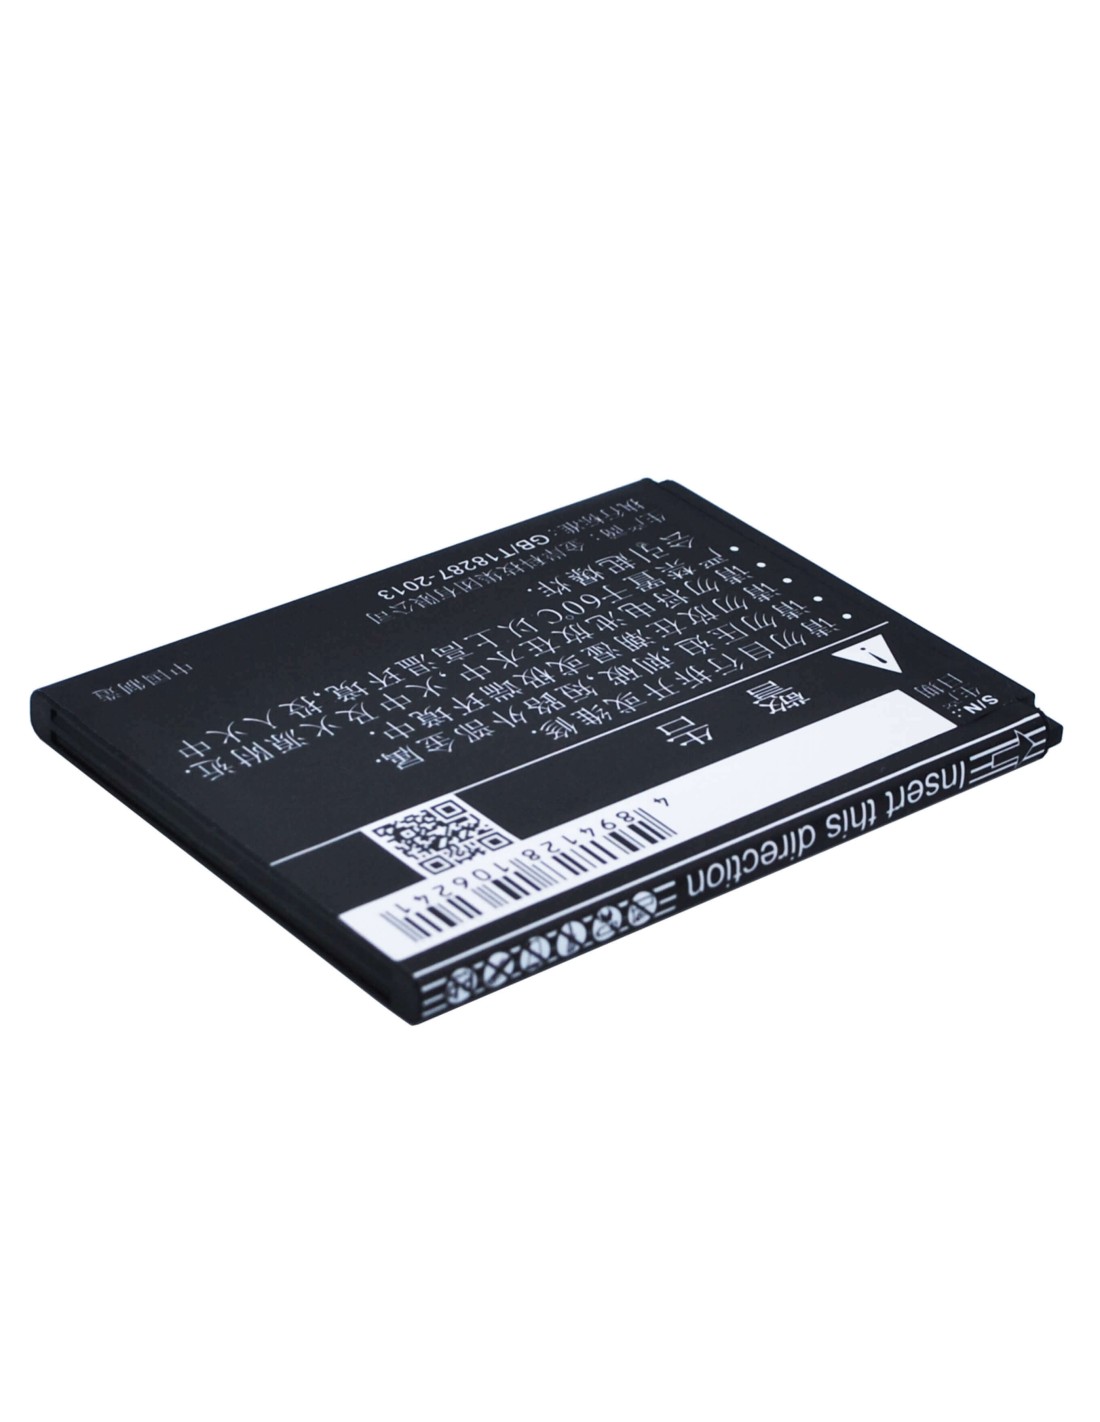 Battery for Coolpad 8707 3.7V, 1500mAh - 5.55Wh